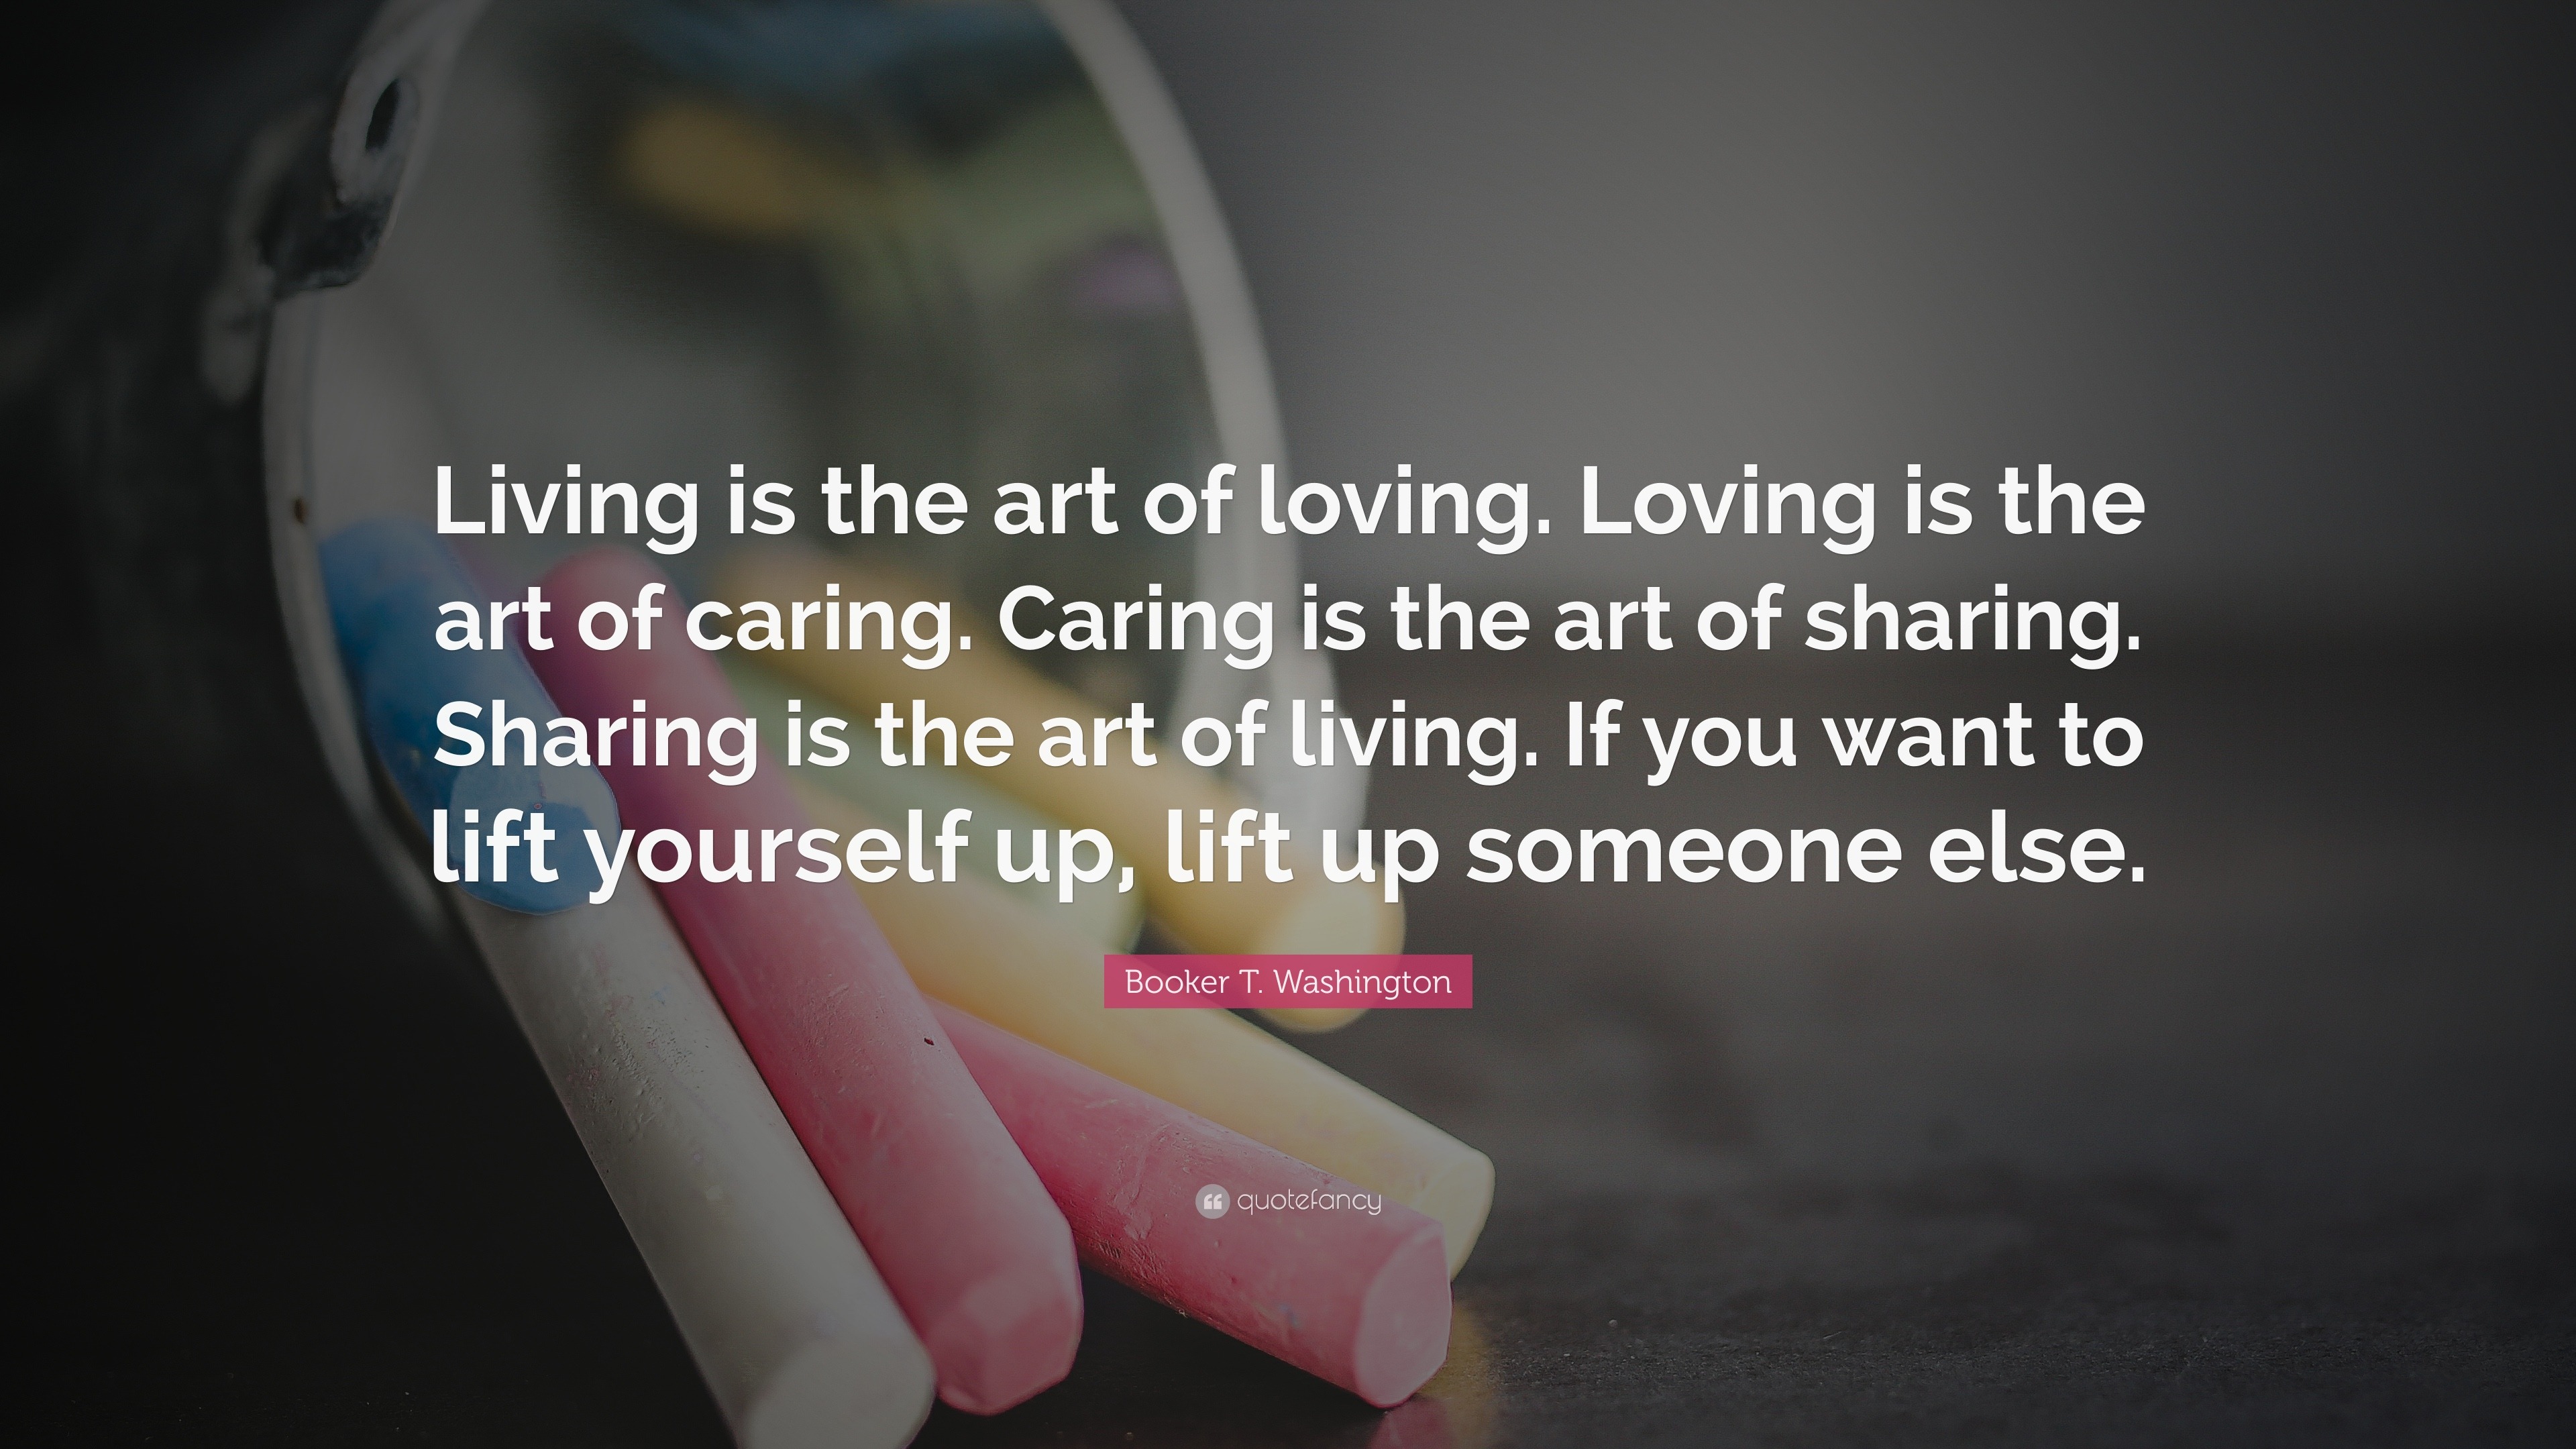 Caring Quotes “Living is the art of loving Loving is the art of